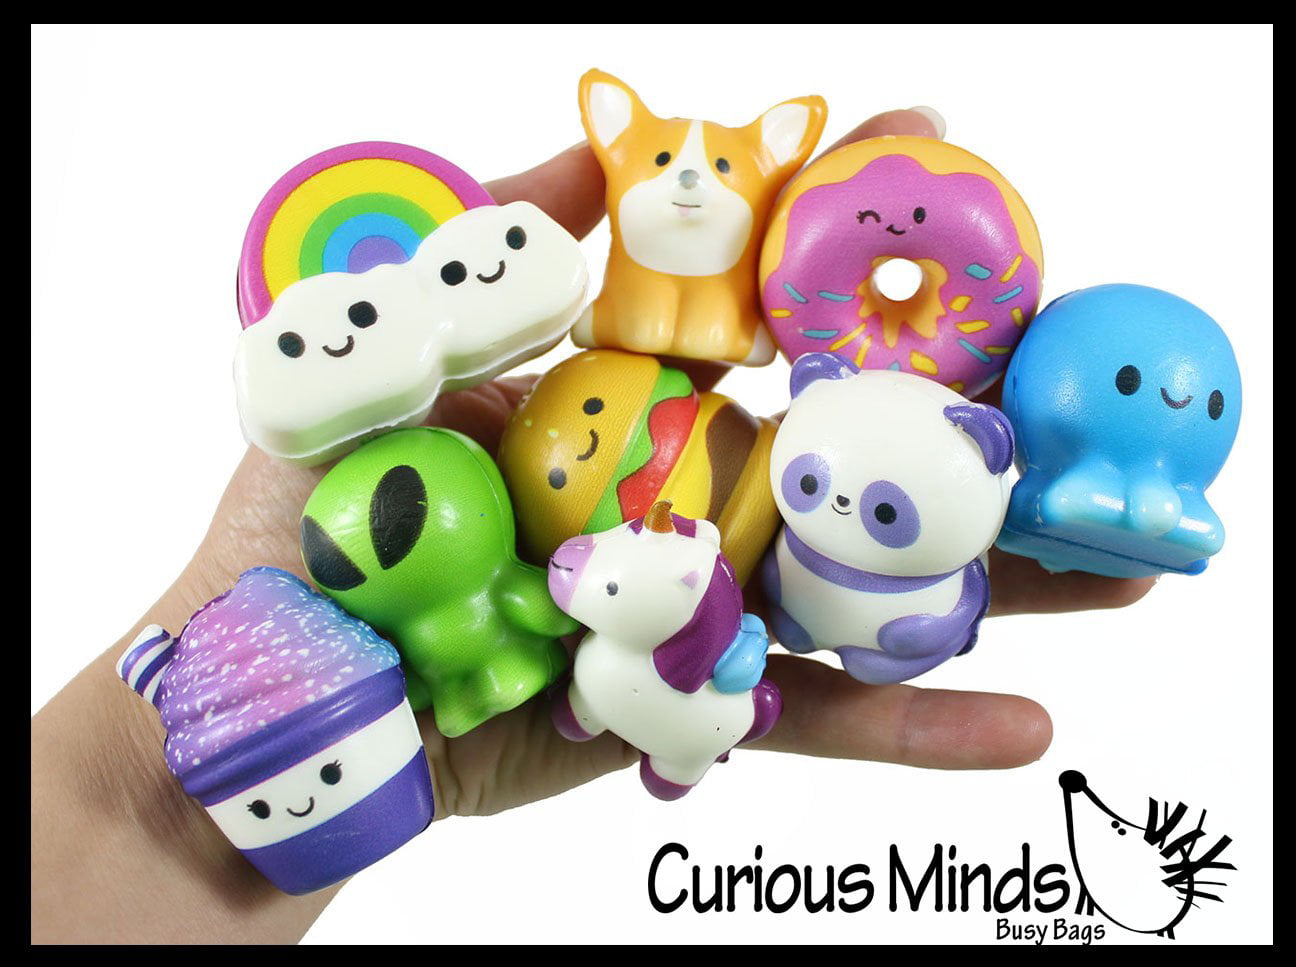 rulletrappe kompromis Genoptag Set of 50 (4 Dozen + 2) Cute Micro Slow Rise Squishy Toys - Mini Animals  and Foods - Memory Foam Party Favors, Prizes, OT (RANDOM SELECTION) -  Walmart.com